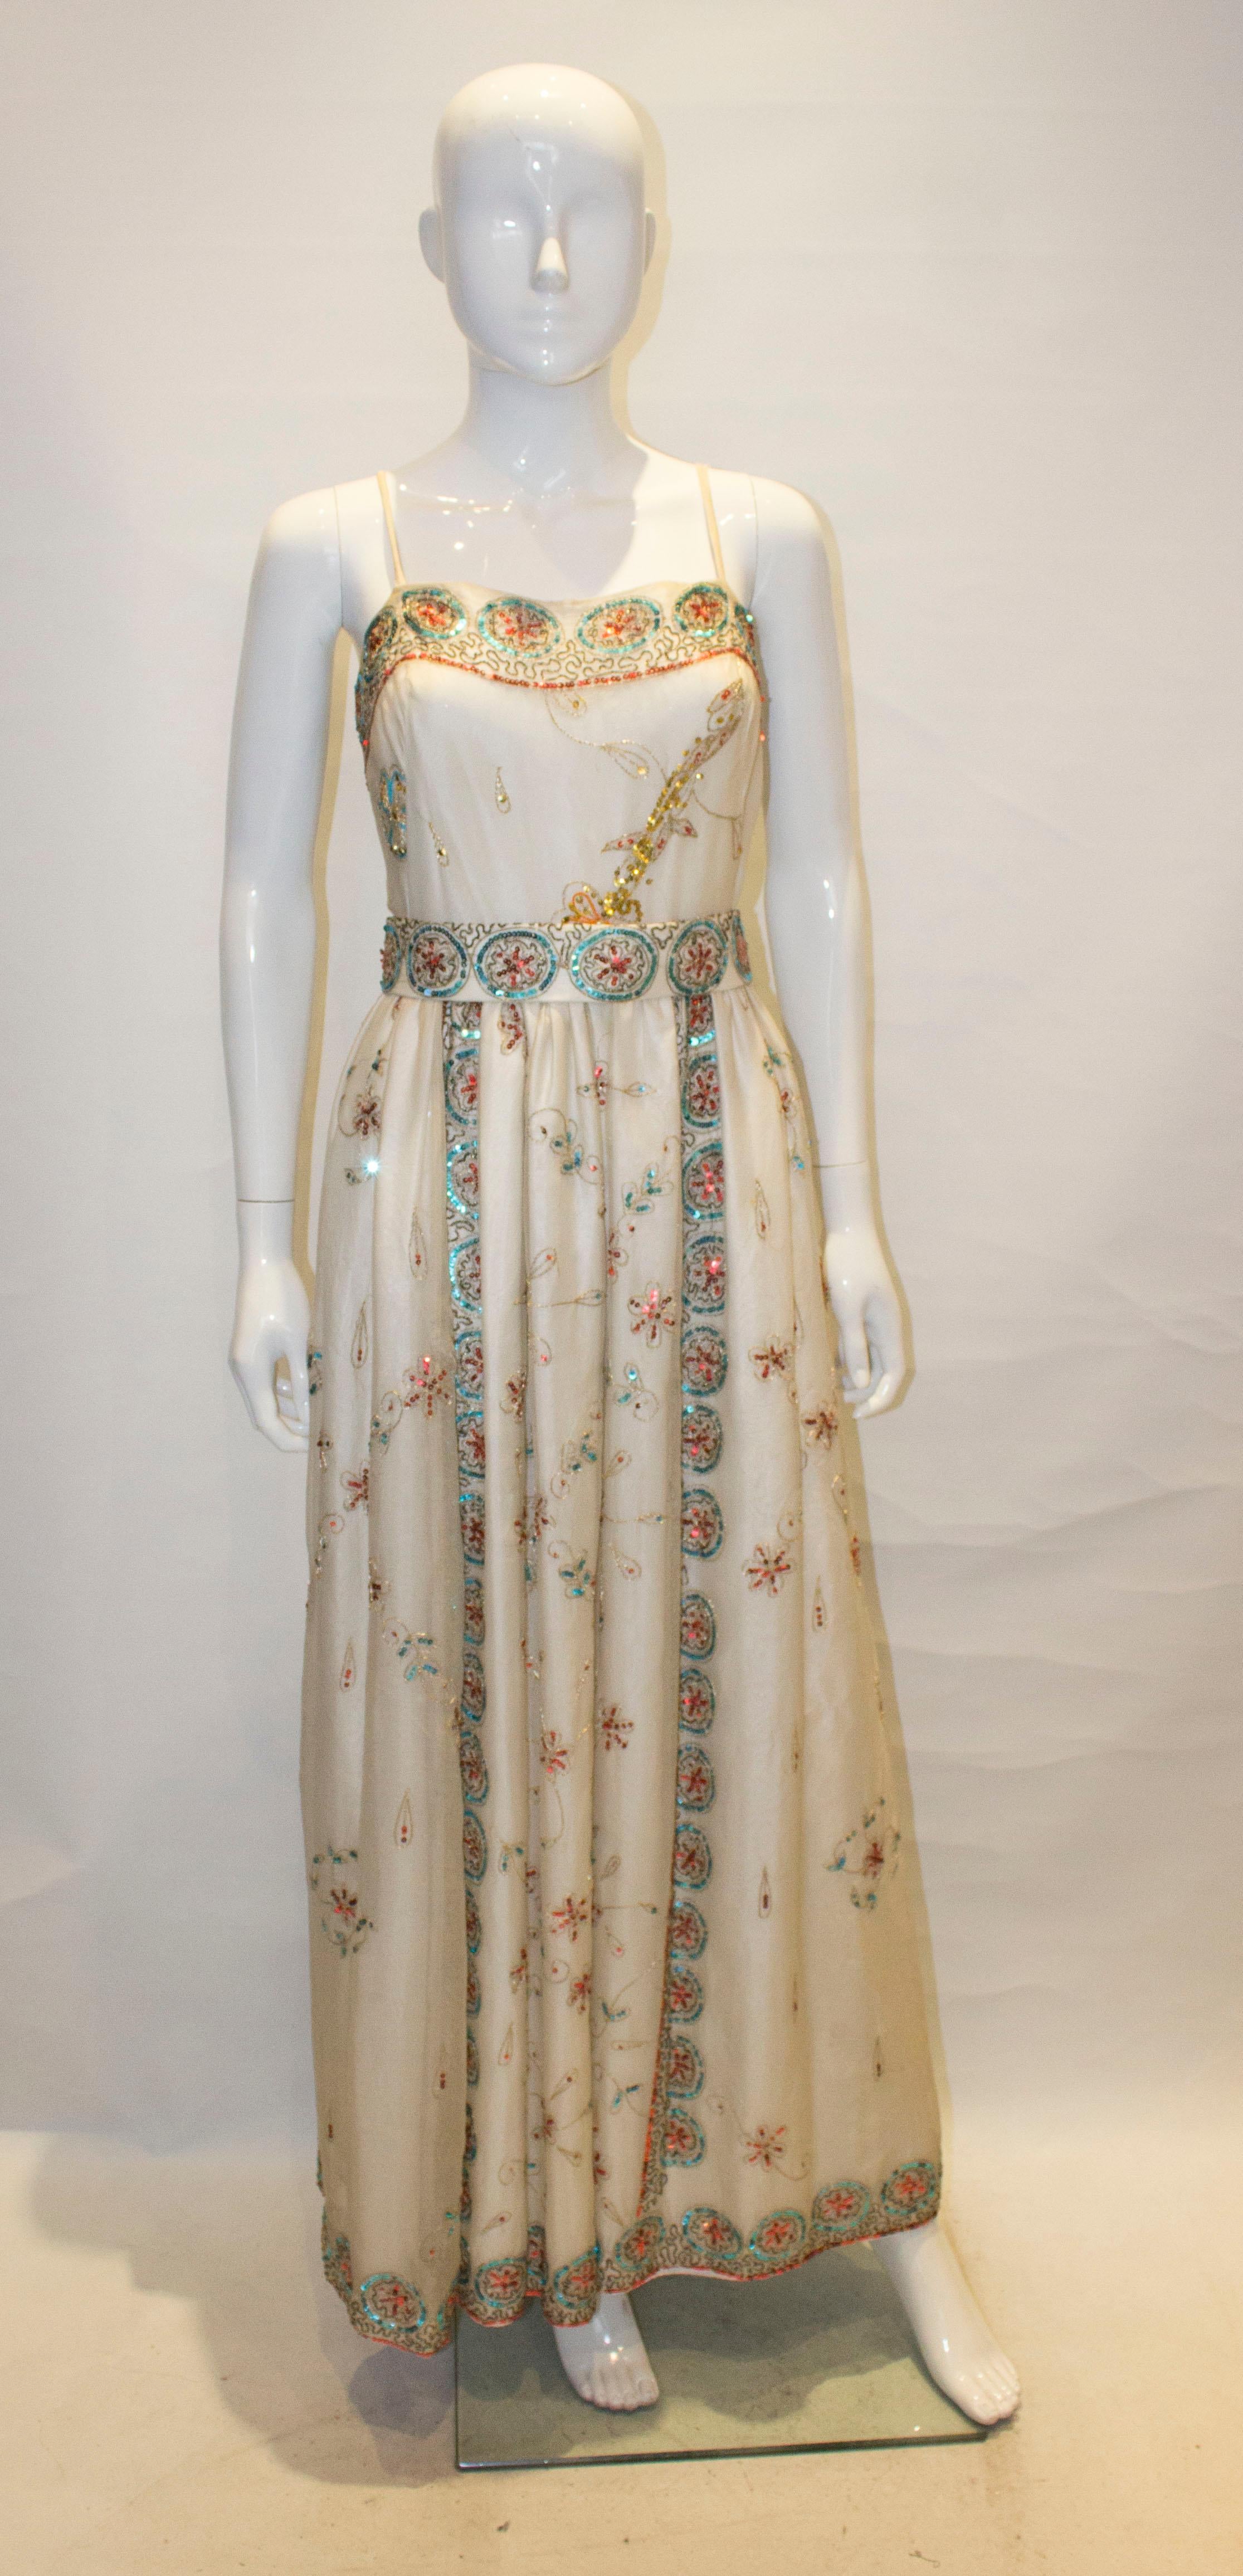 A pretty vintage gown by Profils du Monde of Beverly Hills , California.  The dress is in a white silk with sequin decoration, and has spagetti straps and a marching belt. The dress is fully lined and has a central back zip.